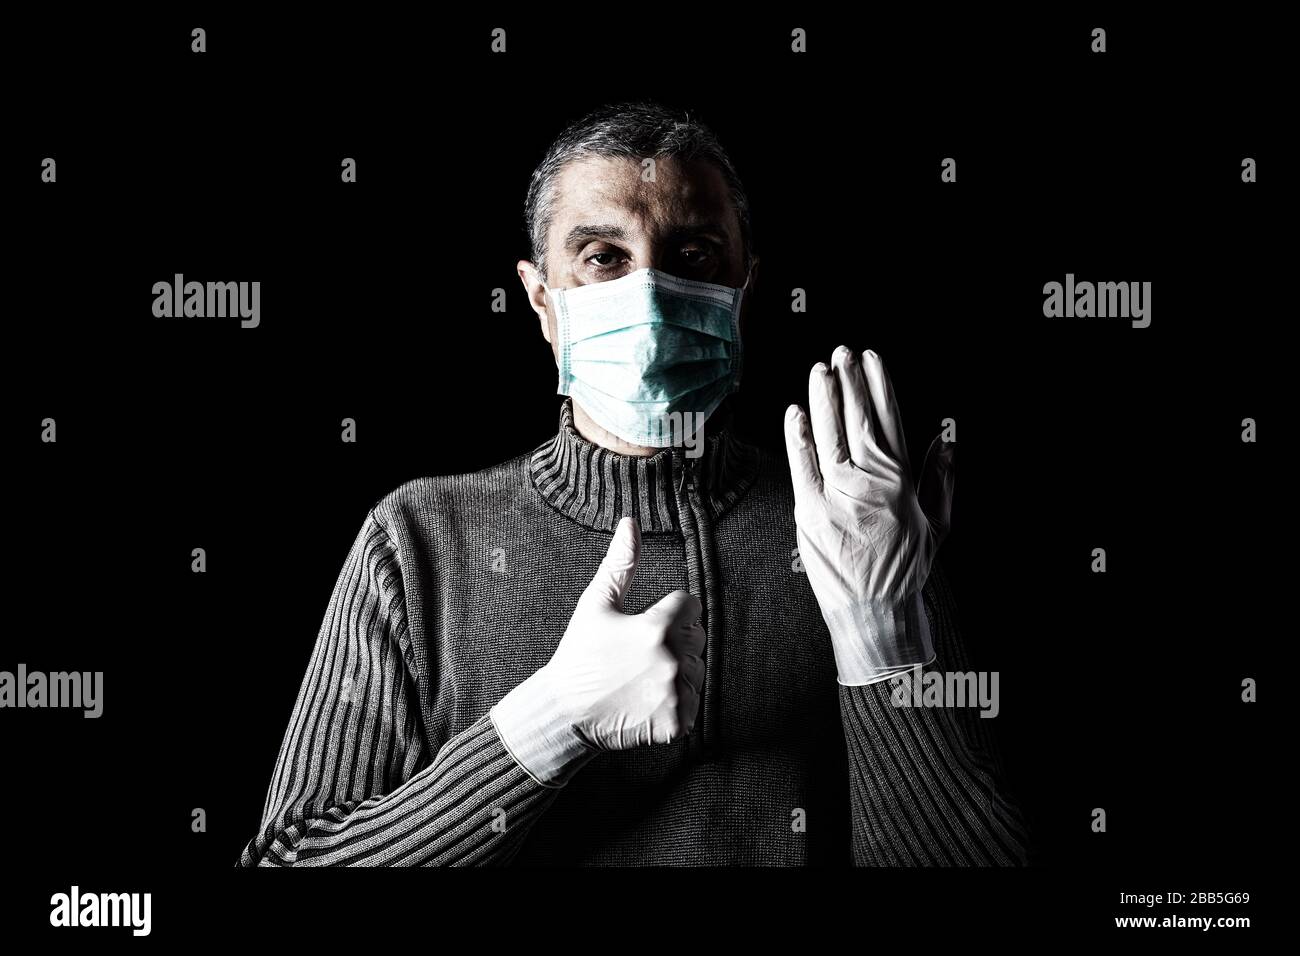 Man with surgical mask, protective gloves and thumbs up. Pandemic or epidemic and scary, fear or danger concept. Protection for biohazard like COVID-1 Stock Photo